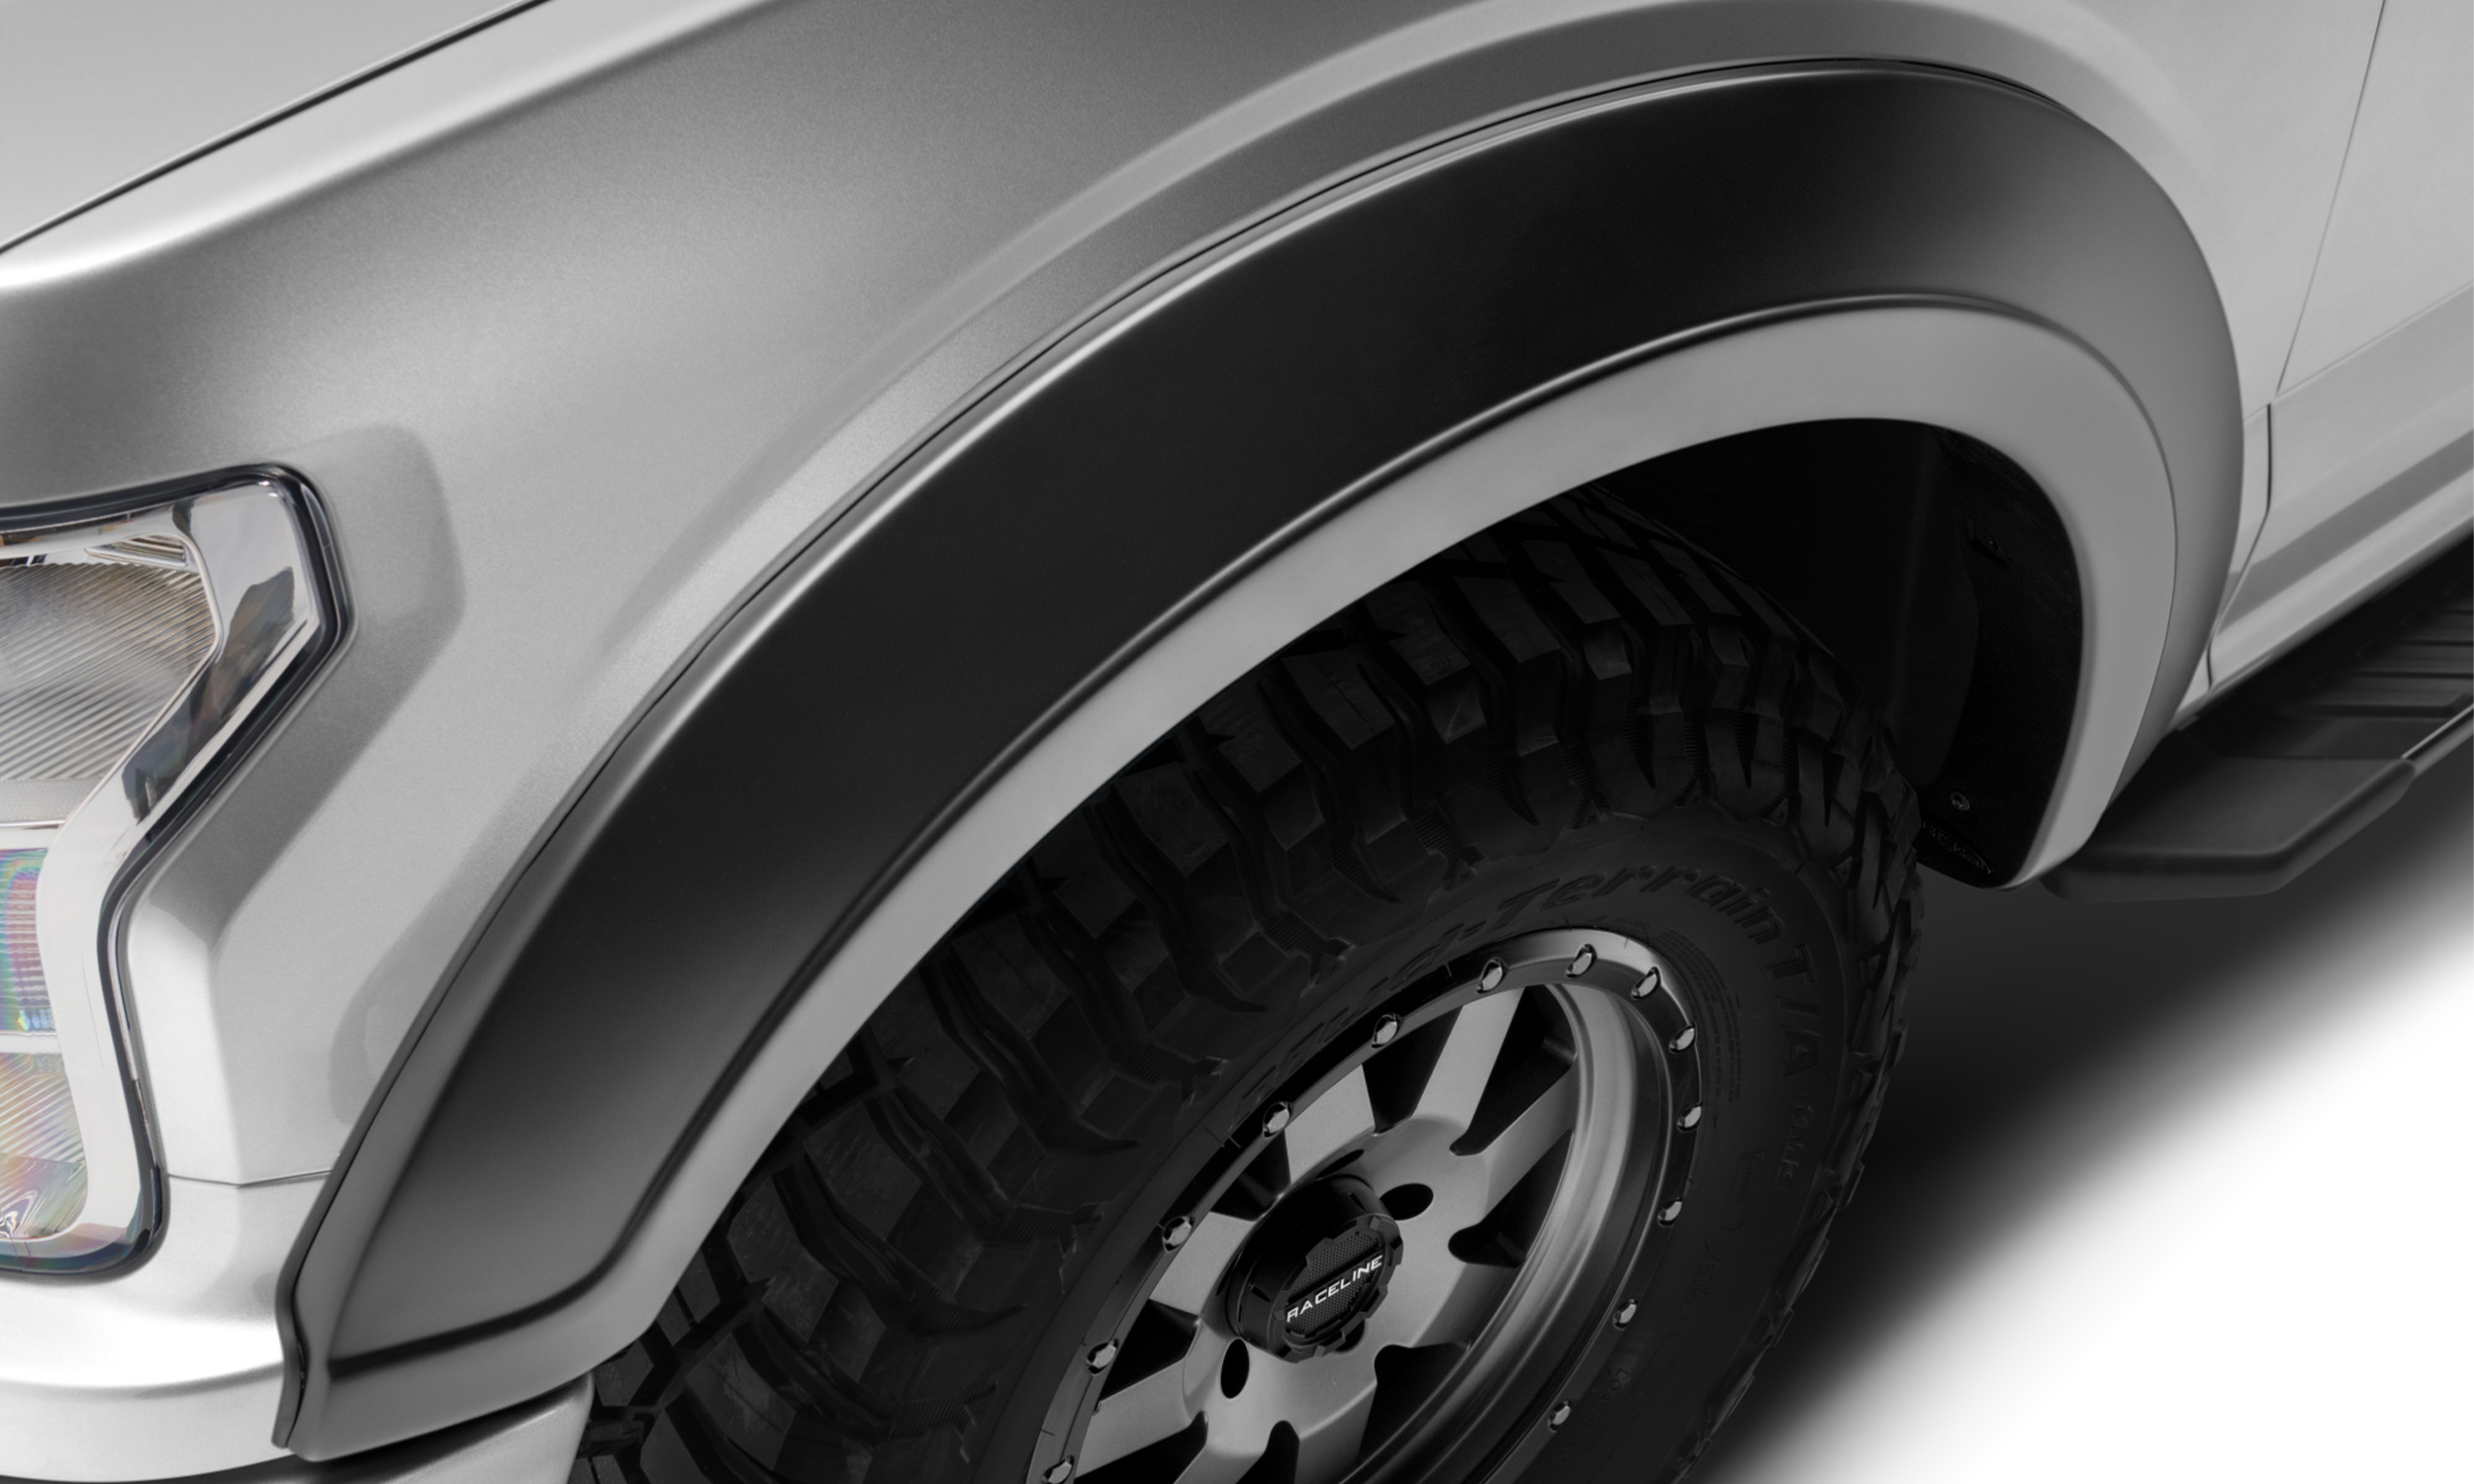 Bushwacker 20061-02 Black Extend-A-Fender Style Smooth Finish Front Fender Flares for 2018-2020 Ford F-150